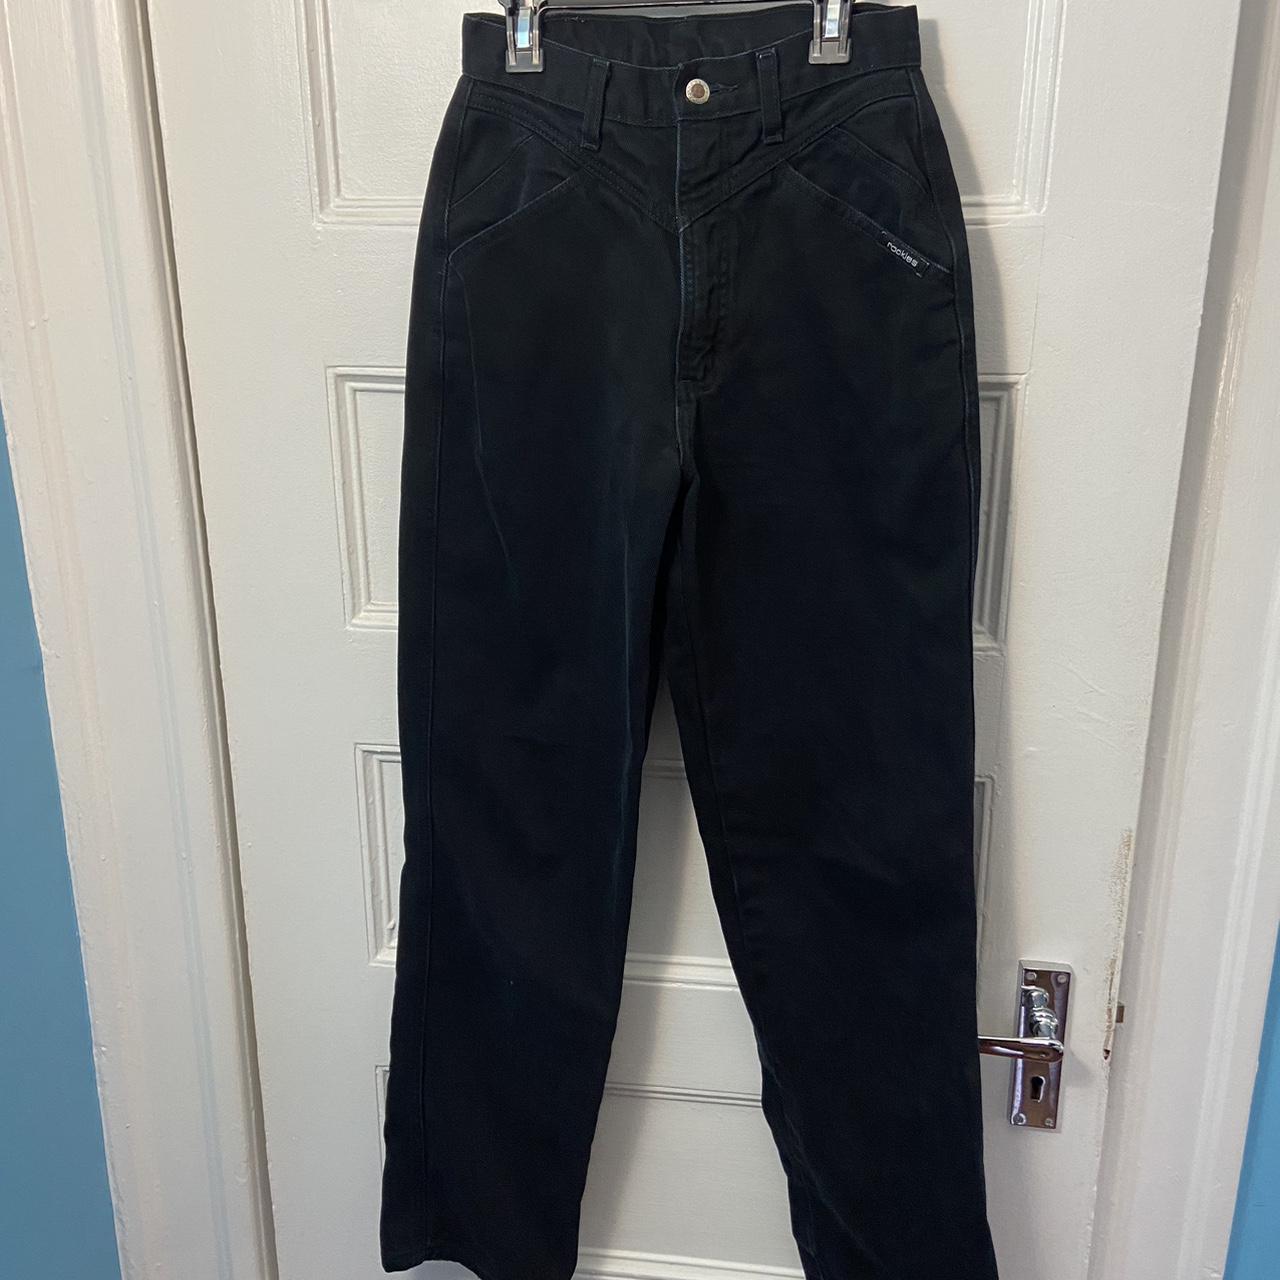 Thrifted Vintage Rockies Jeans Size 5/6, but fits... - Depop